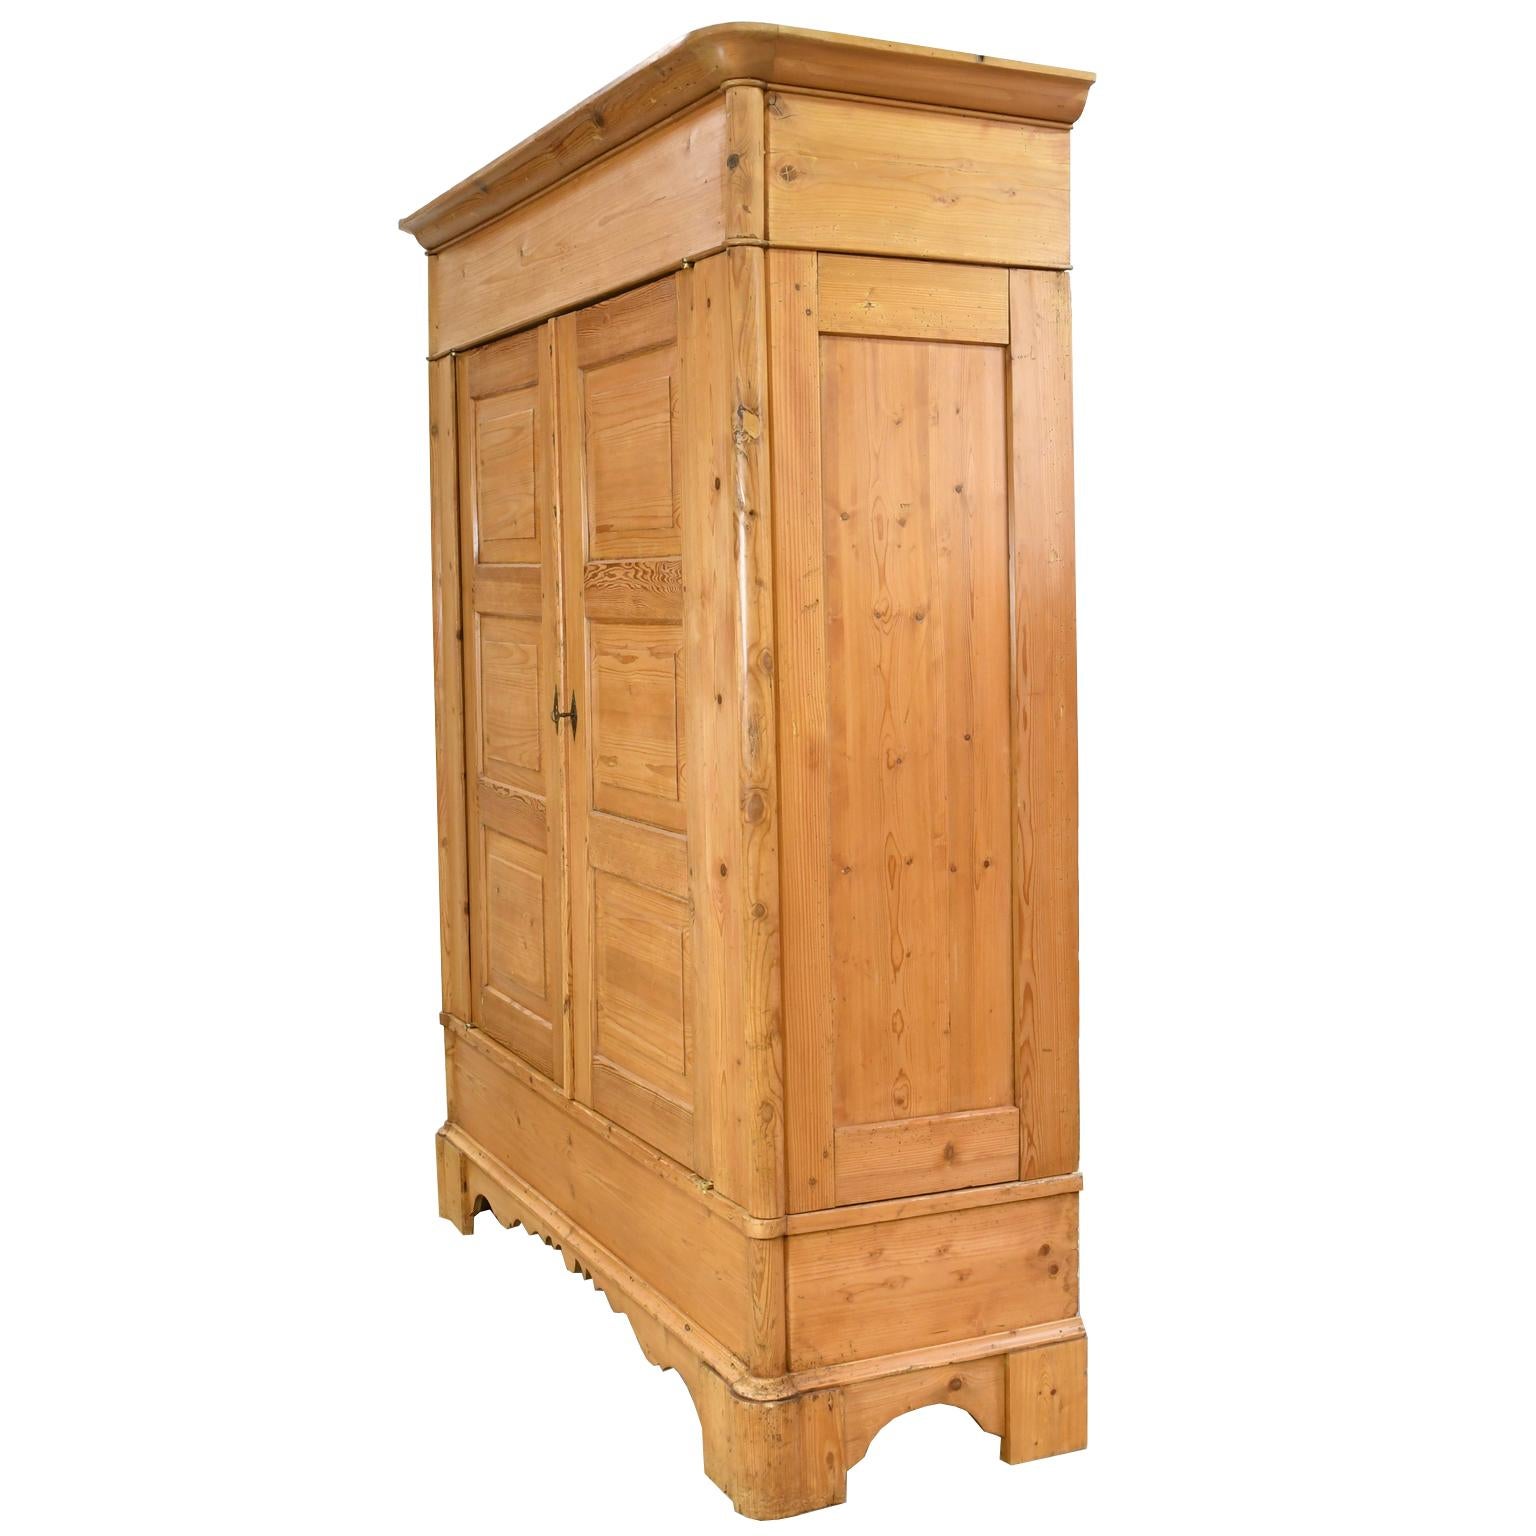 Early 19th Century Biedermeier Inspired Scrubbed Pine Armoire from Northern Germany, circa 1820